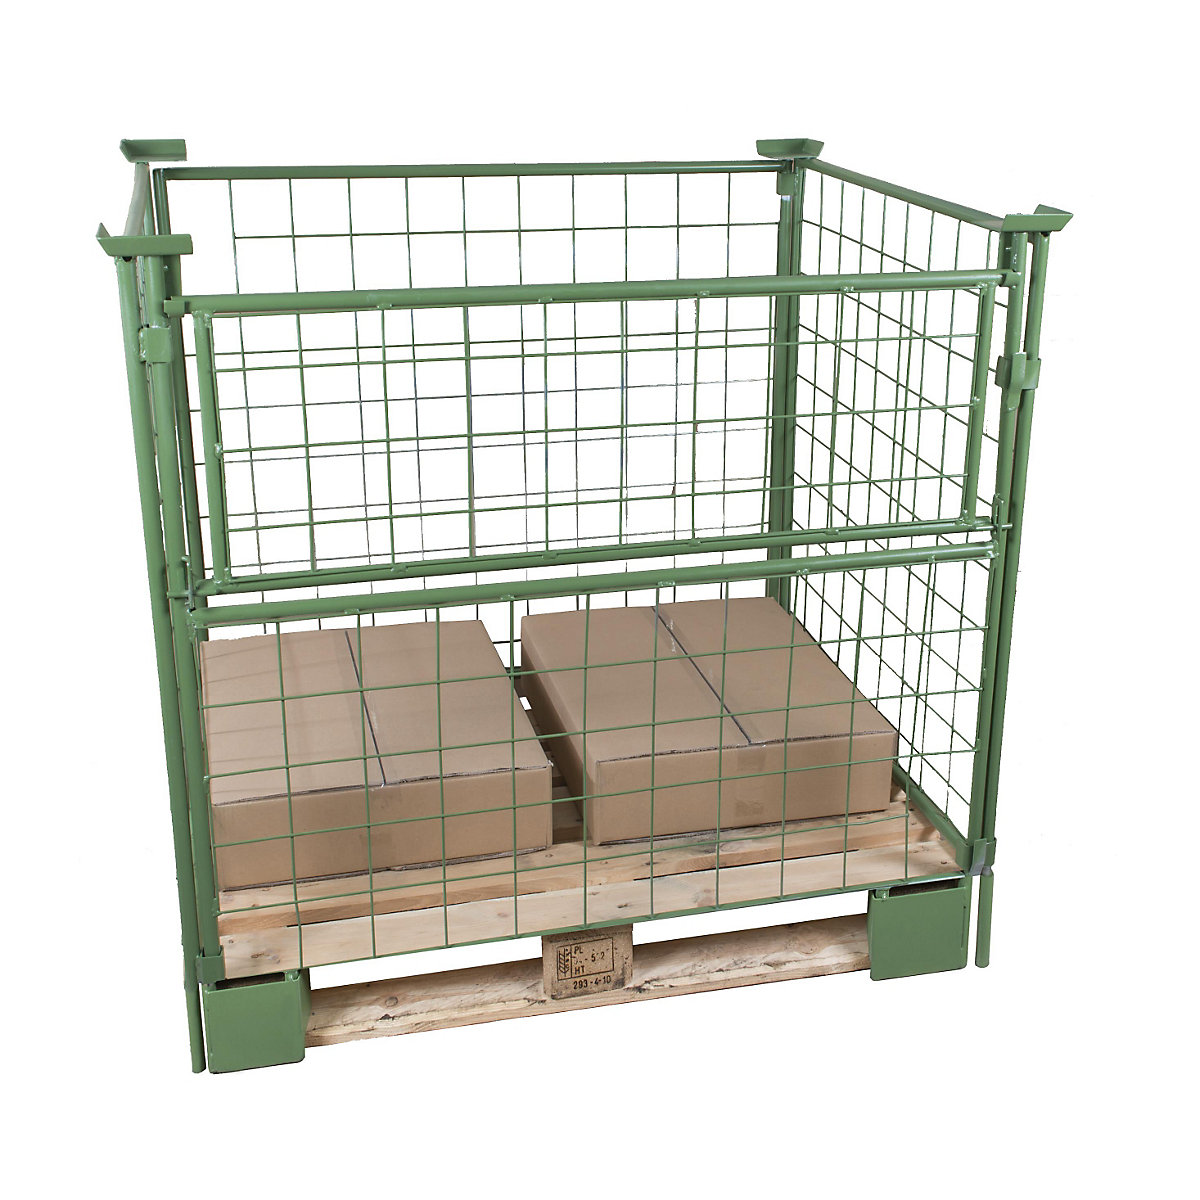 Pallet frame, effective height 800 mm, for stacking, WxL 800 x 1200 mm, 1 long side can be half folded-1